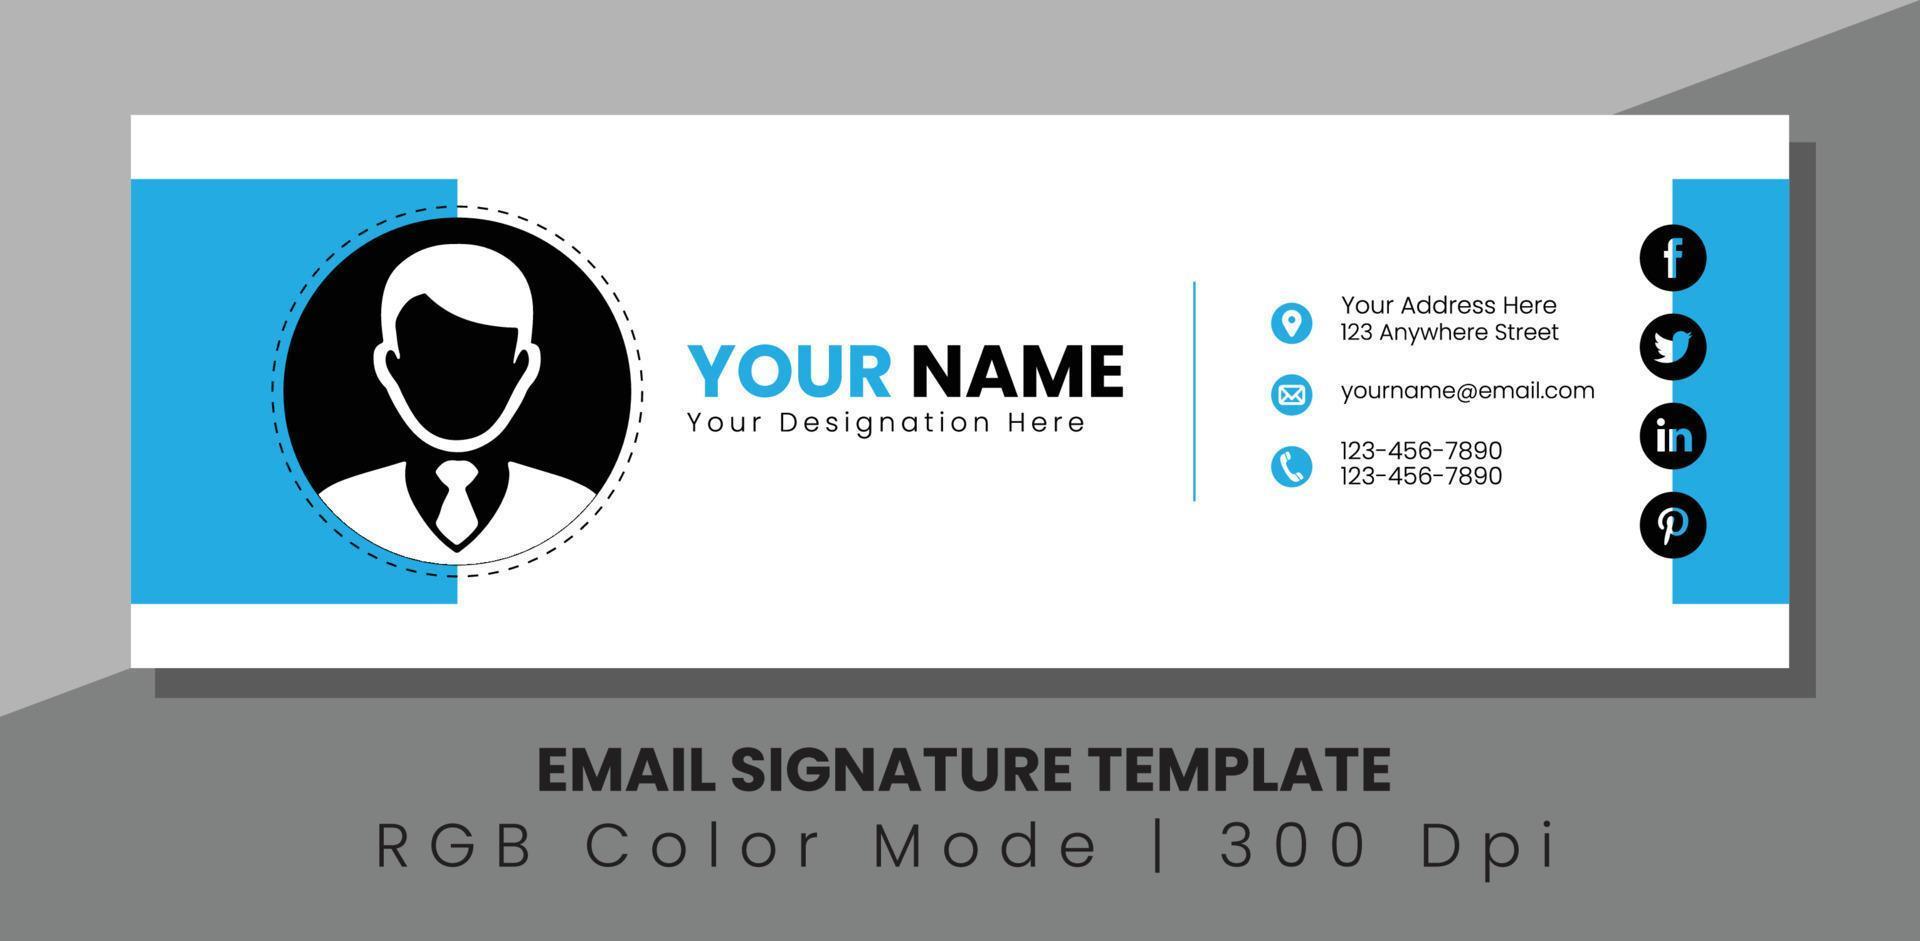 Professional Modern Email Signature Design Template vector